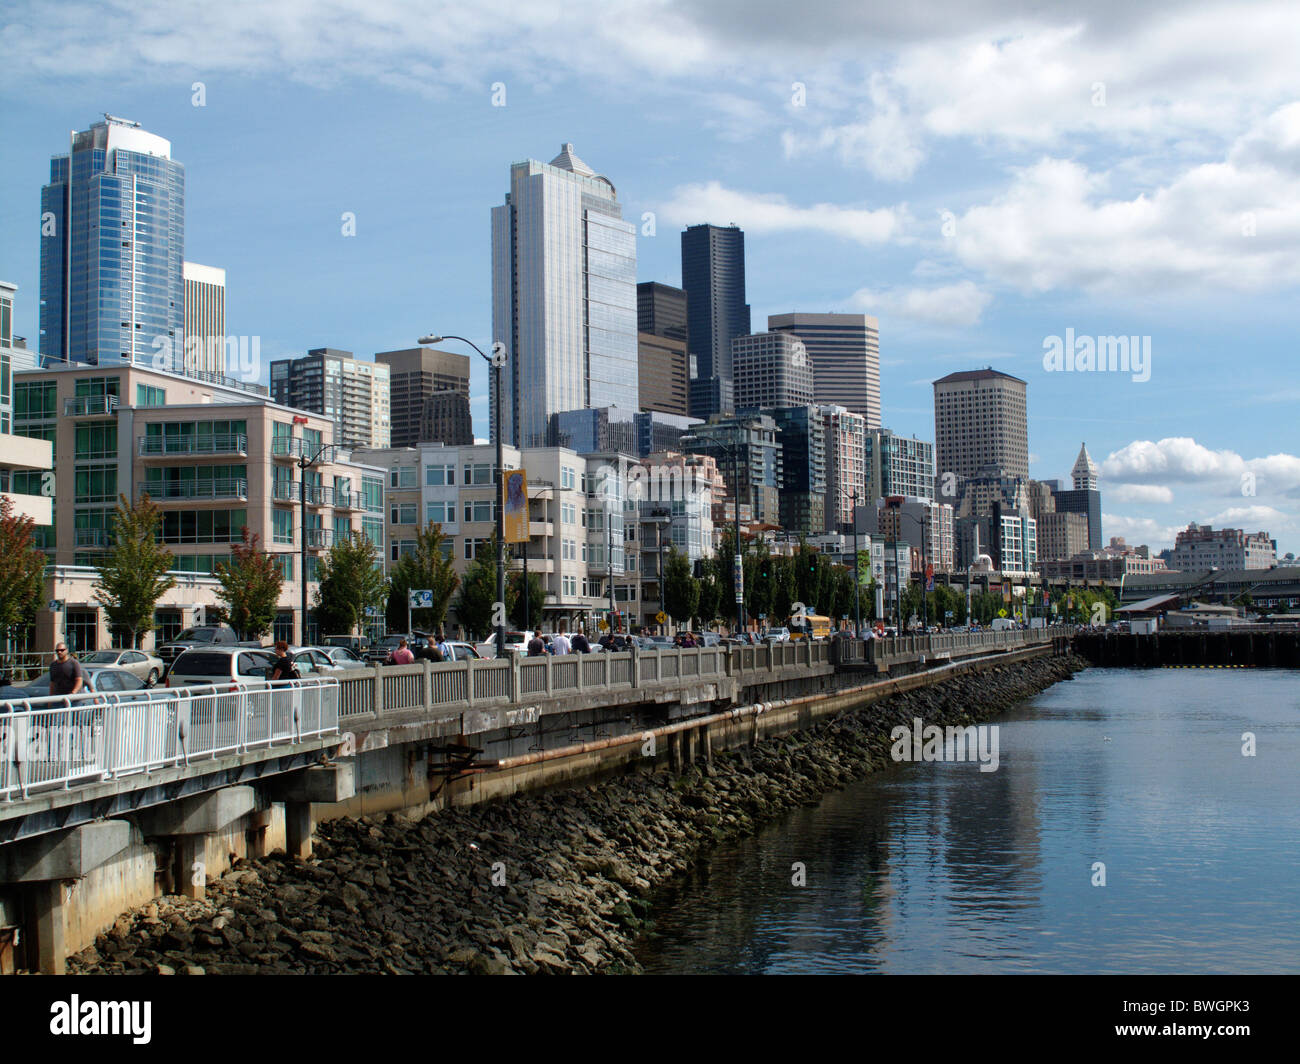 The downtown Seattle Waterfront in Washington State, United States of America Stock Photo